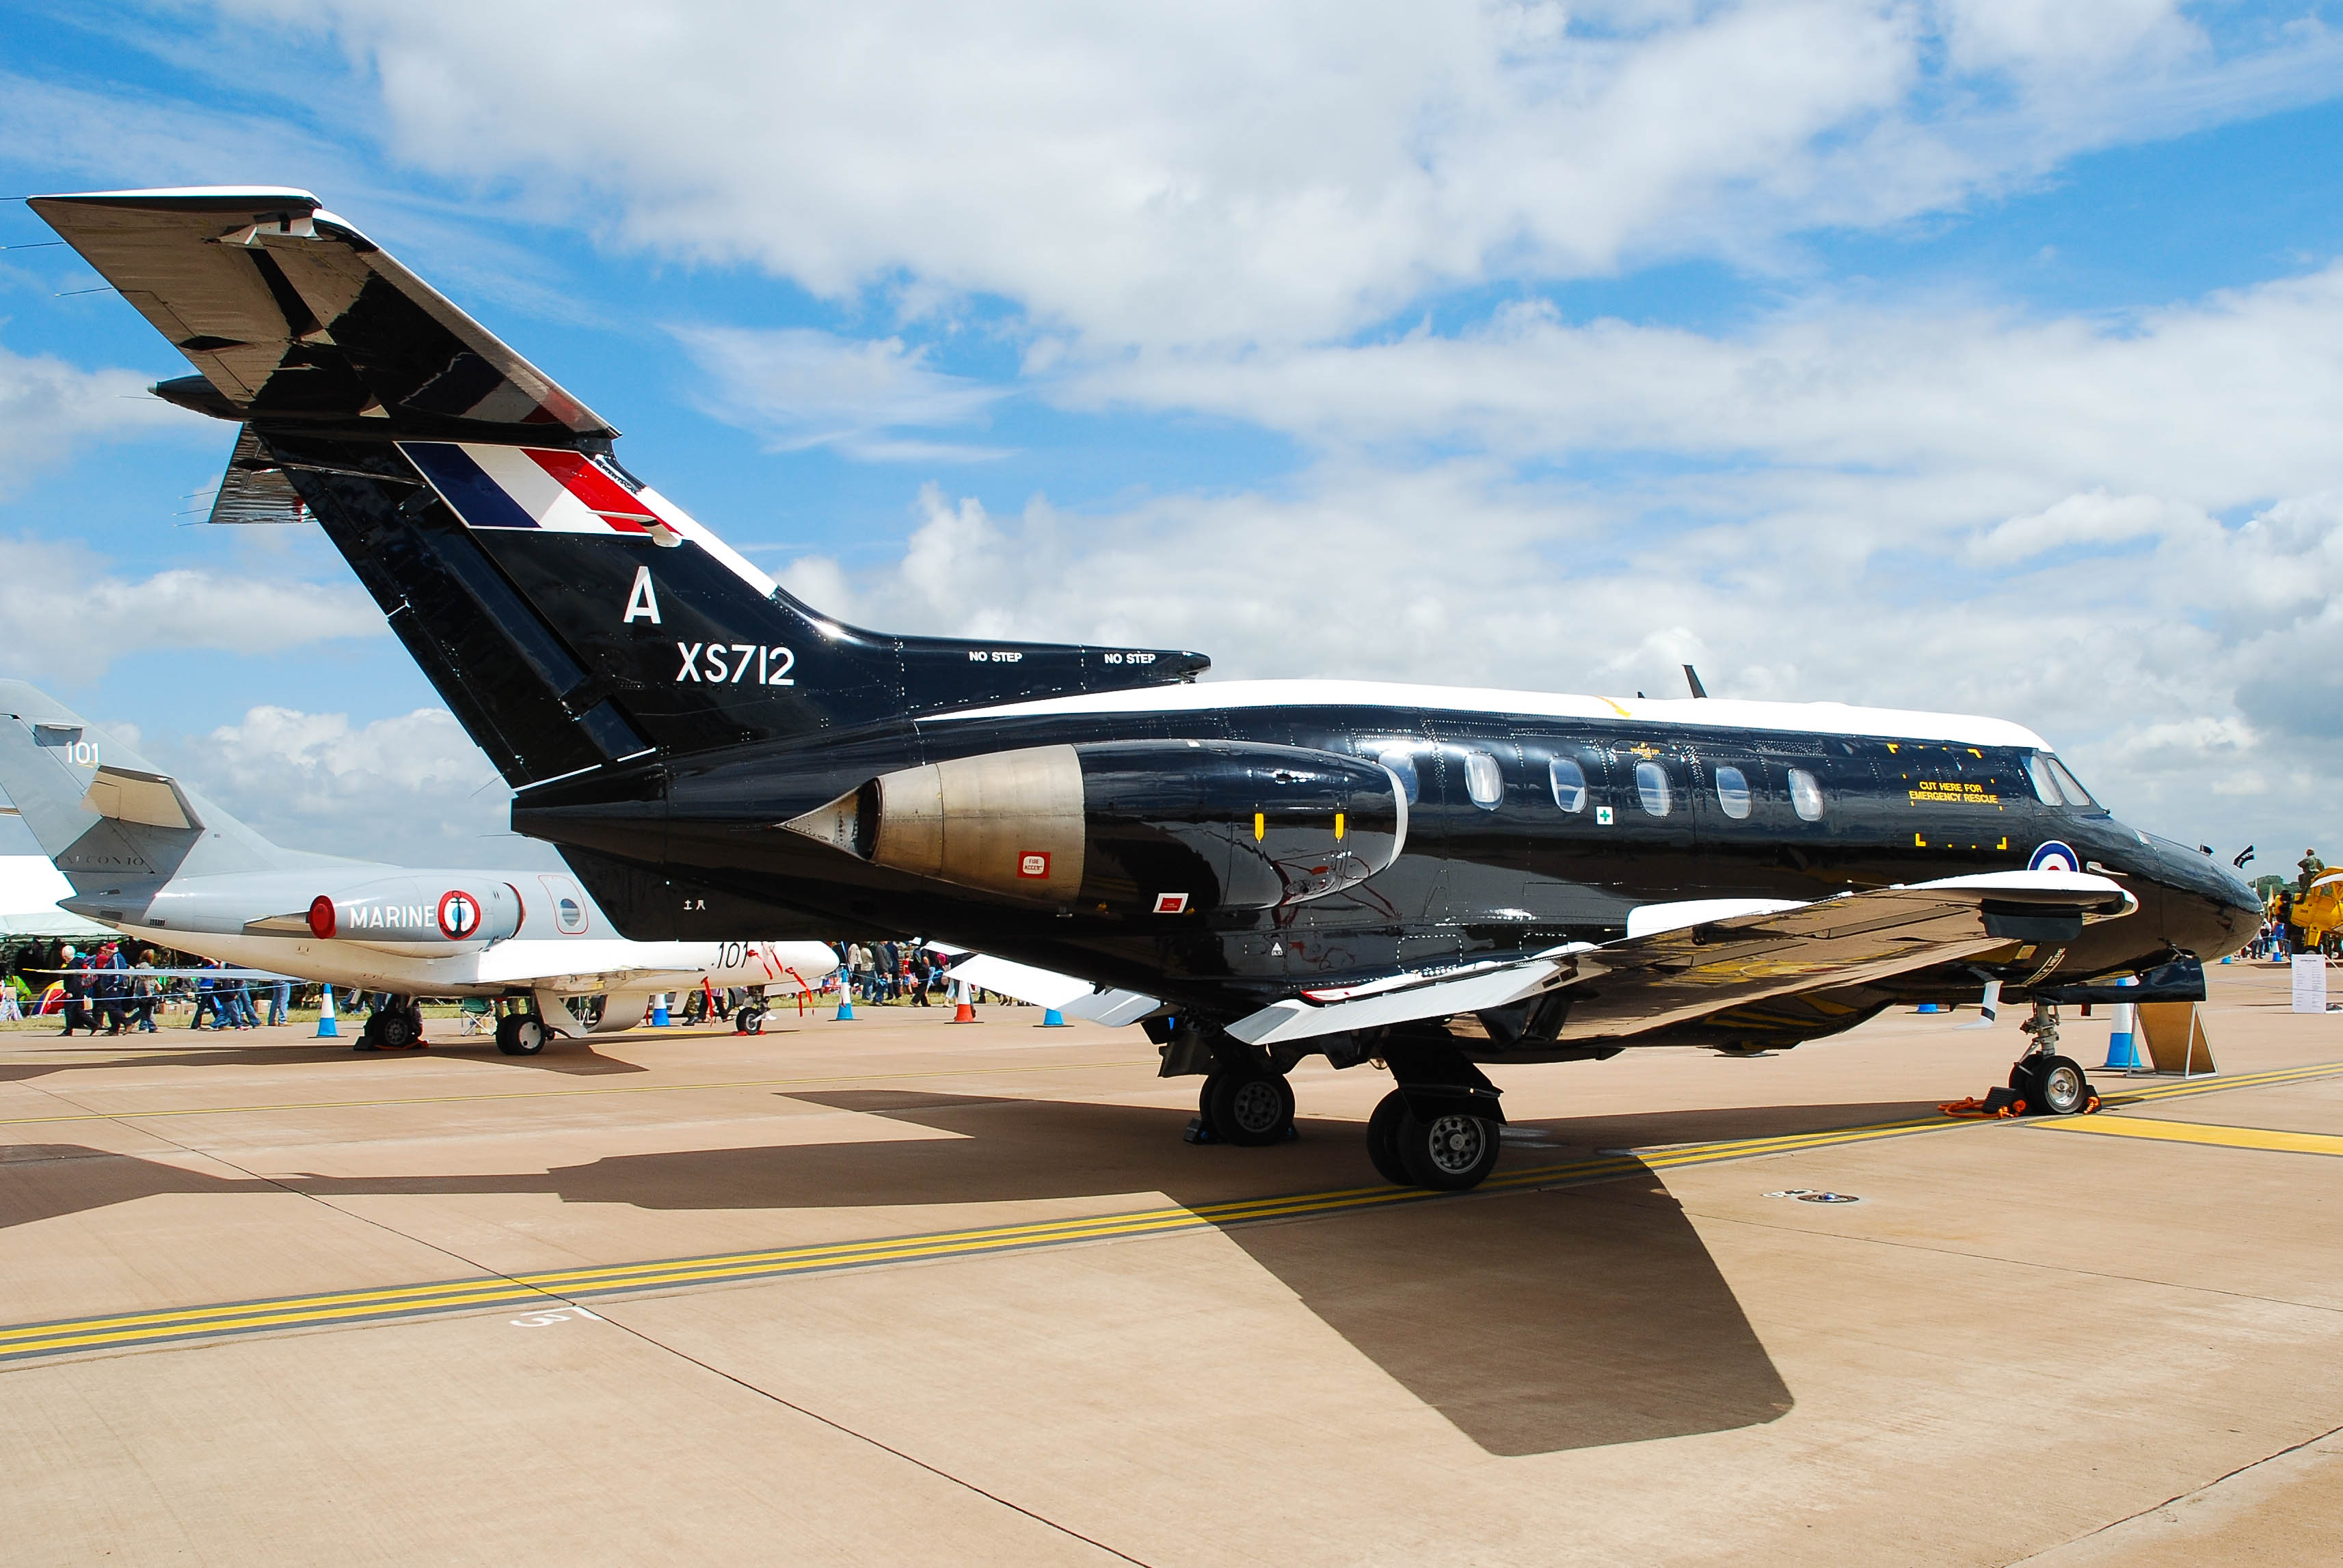 XS712/XS712 Royal Air Force Hawker Siddeley Dominie T.1 Photo by colinw - AVSpotters.com